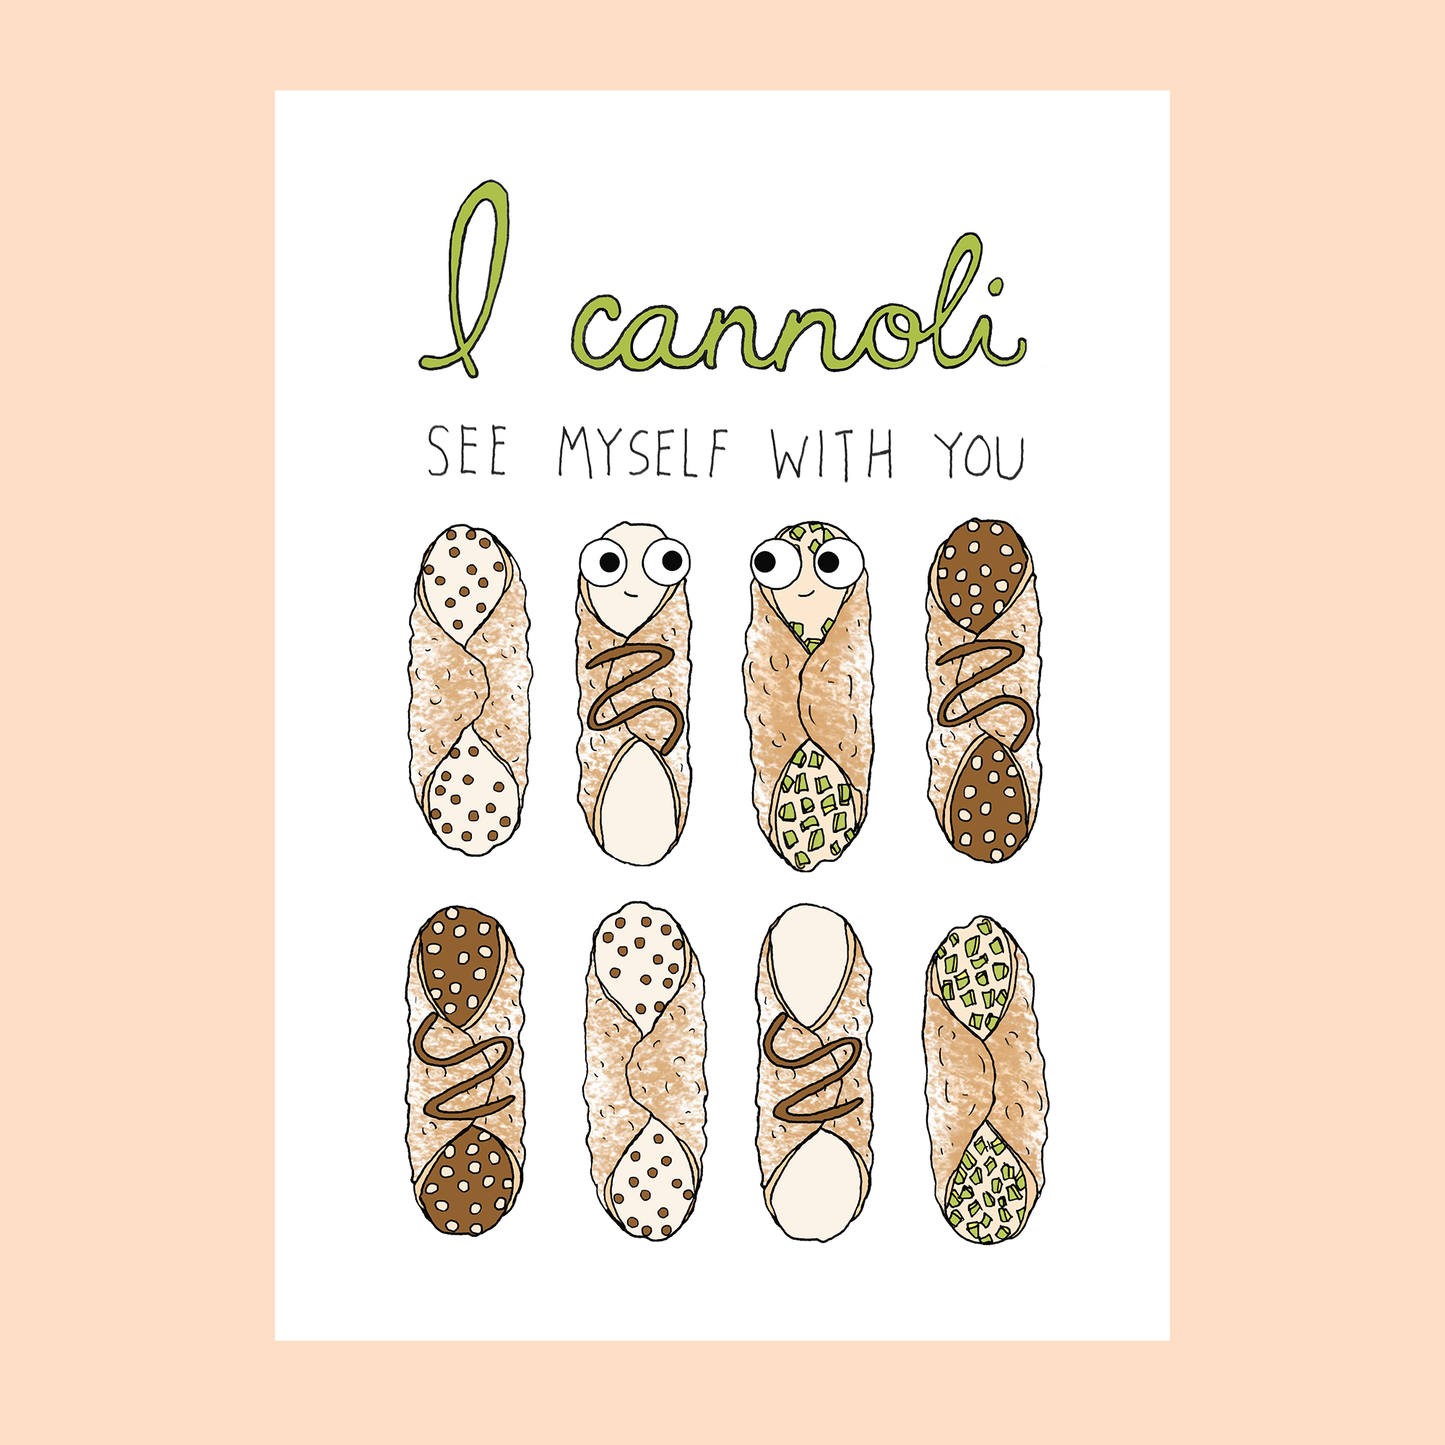 Cannoli love card -- white with 8 cannolis and text up top that reads "I cannoli see myself with you" 